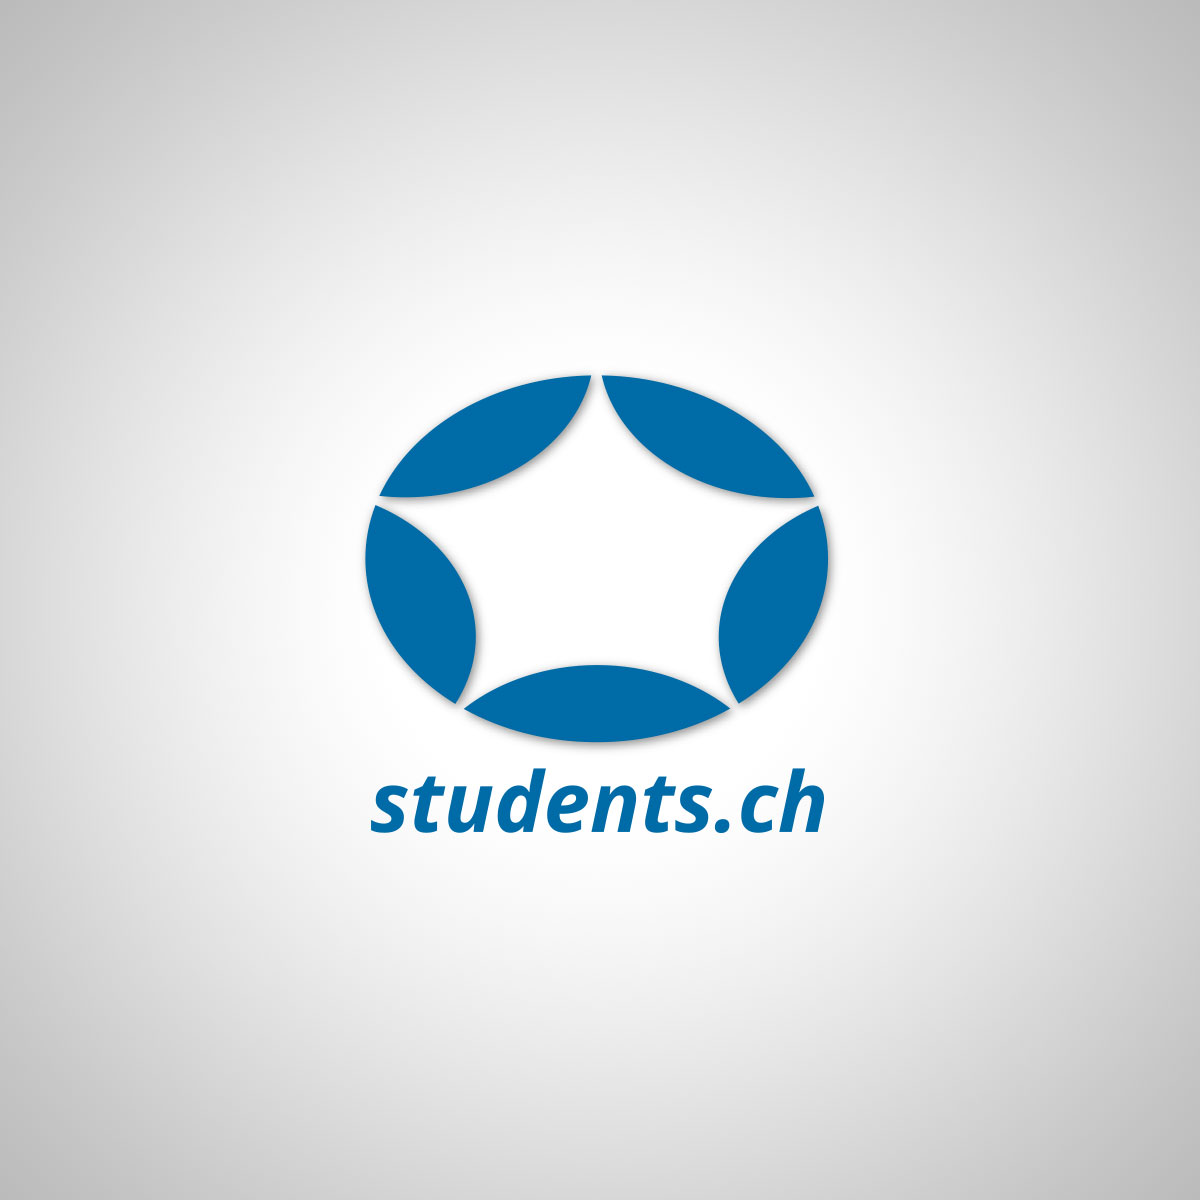 (c) Students.ch